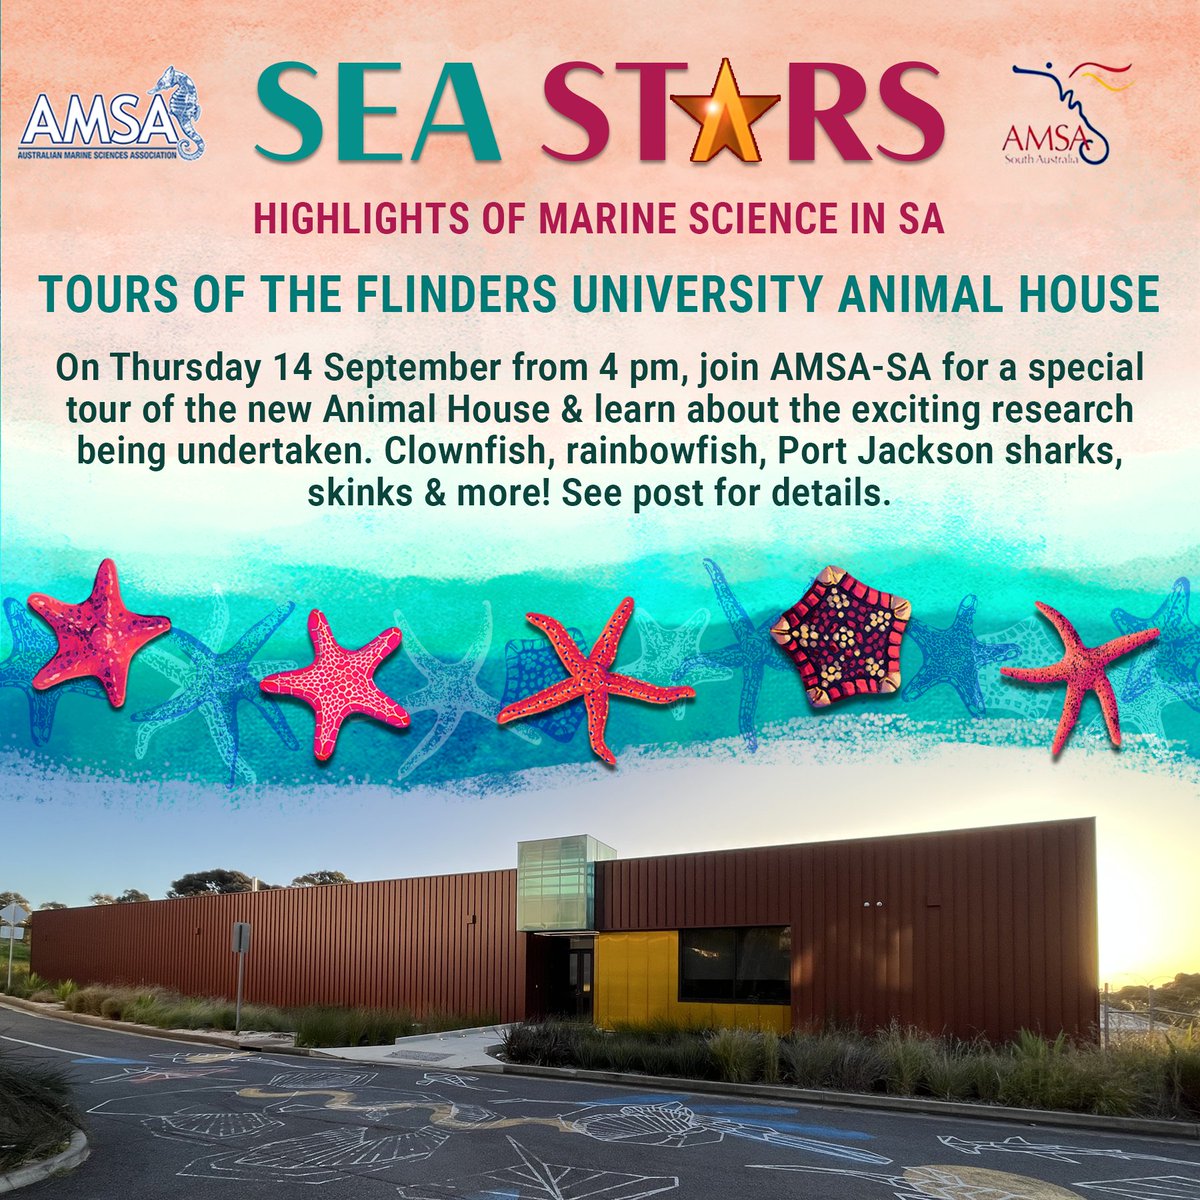 'Sea Stars' Event #2 is just under a week away! On Thursday 14 September, join AMSA-SA for a special tour of the Flinders University Animal House. Learn about clownfish, rainbowfish, Port Jackson sharks, skinks and more! Tickets and event details: bit.ly/3Kzuy8U